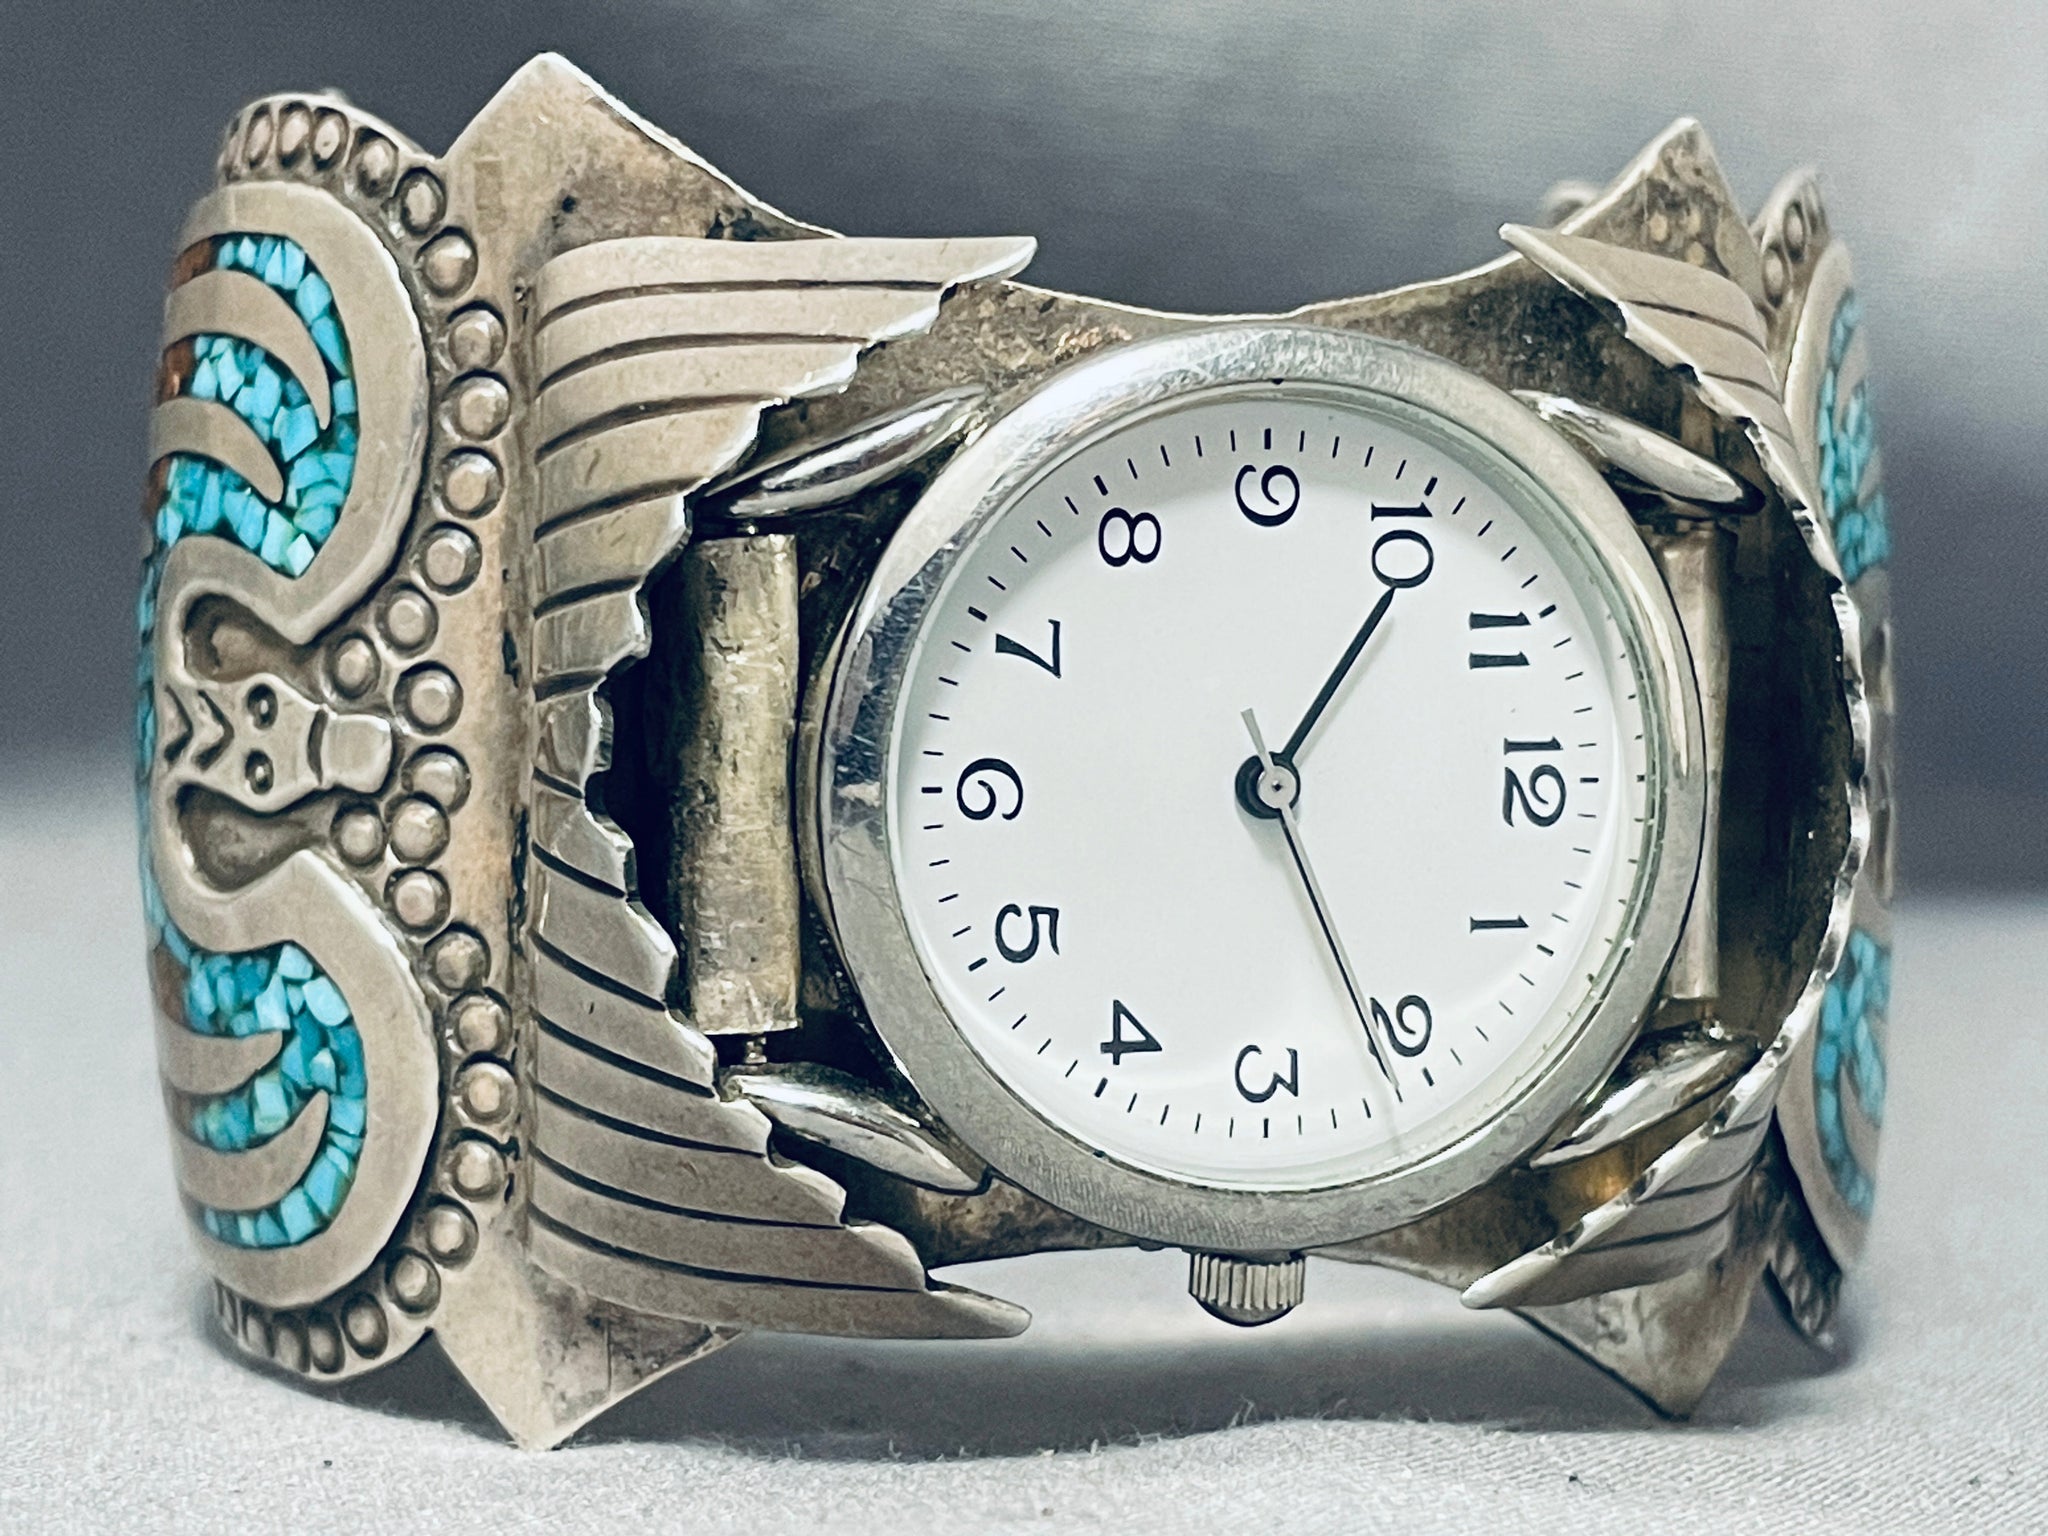 American Indian Artisans Still Make Silver Watch Accessories  The New York  Times